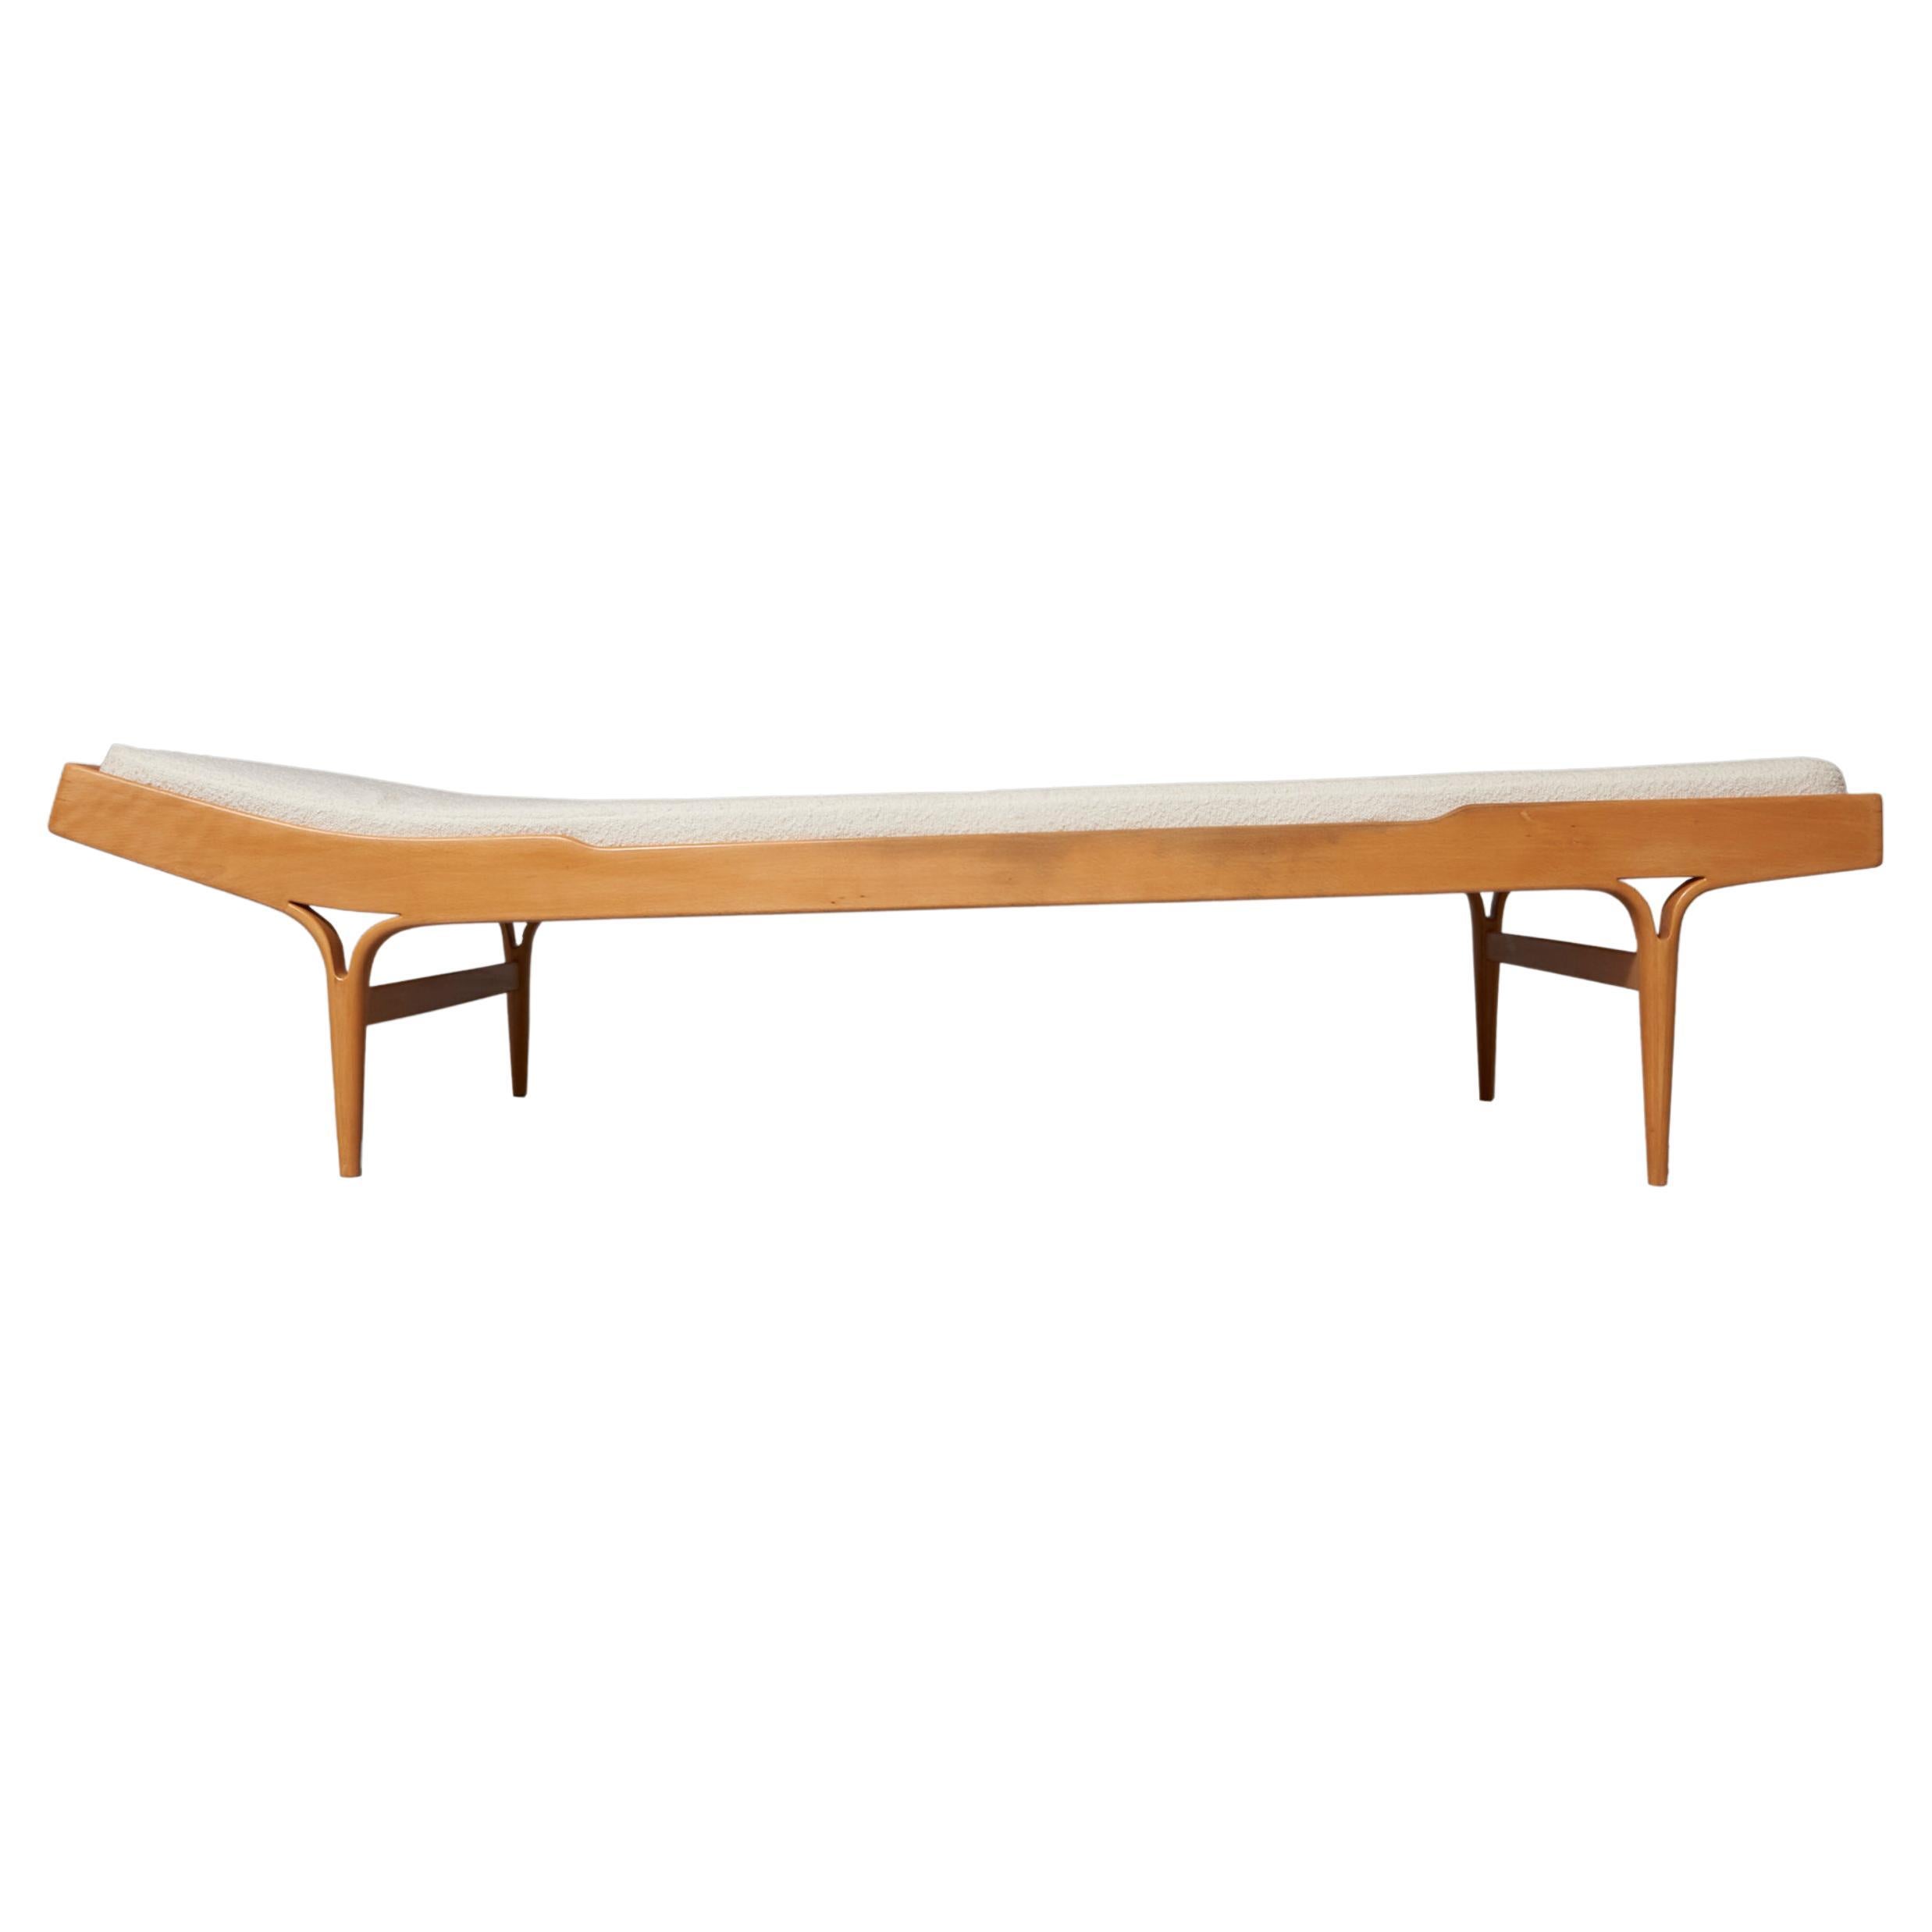 1950’s Bruno Mathsson ‘T-303’ ‘Berlin daybed’ in Beech